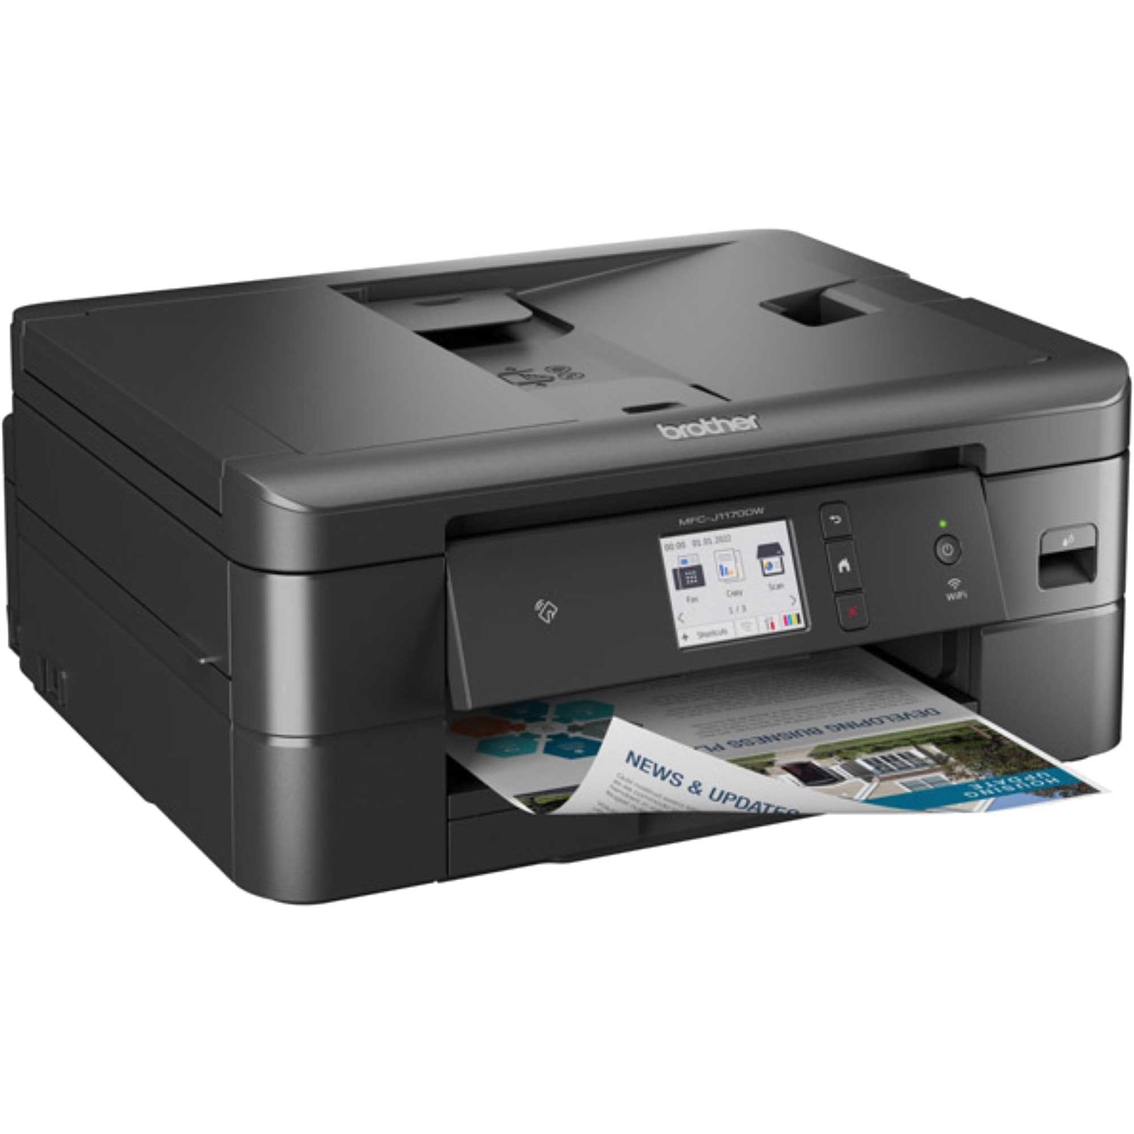 Brother MFC-J1170DW Wireless Color Inkjet All-in-One Printer - Image 3 of 3